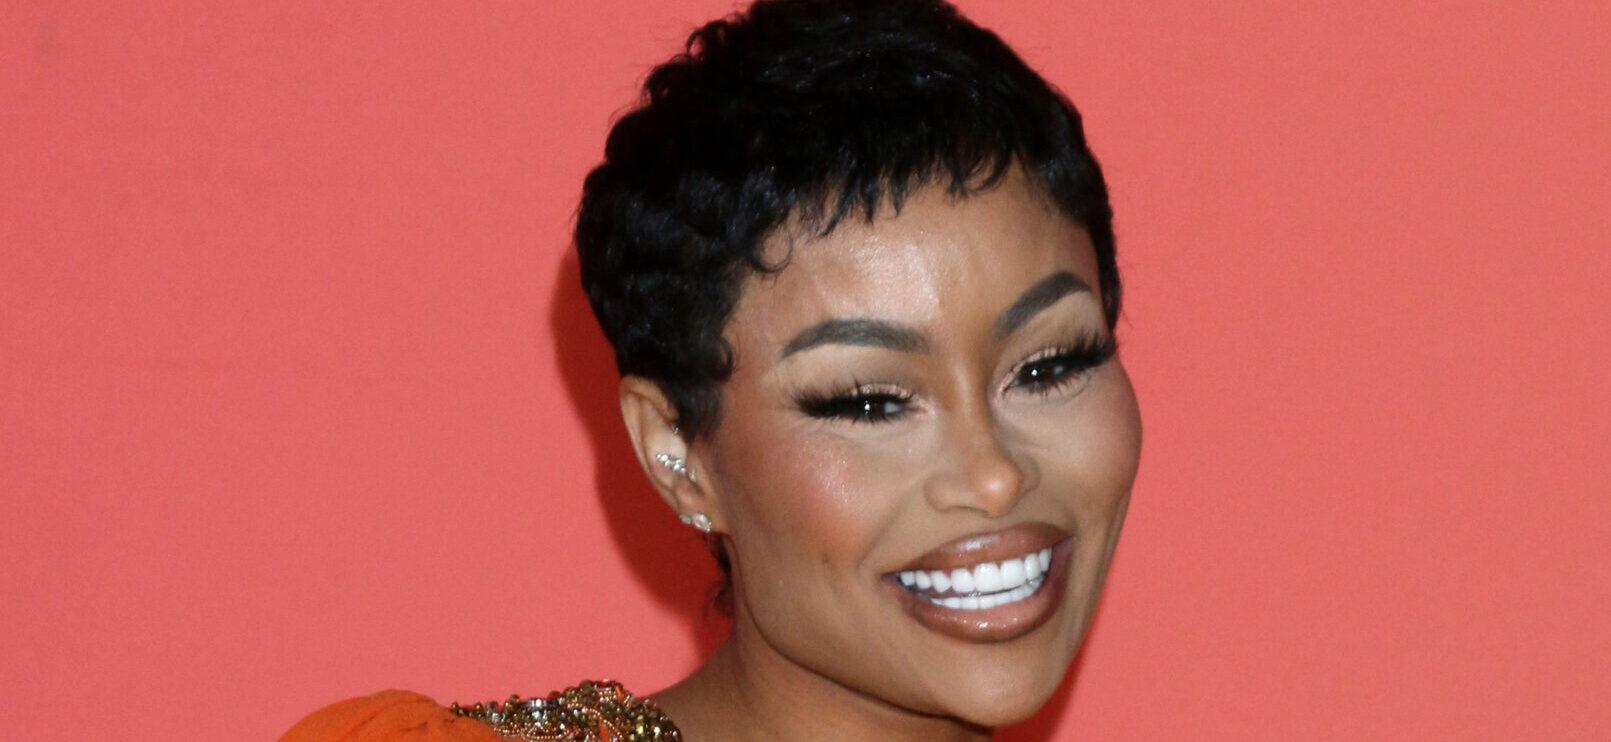 Blac Chyna Goes ‘Snap, Crackle, Pop’ During Viral Chiropractic Session